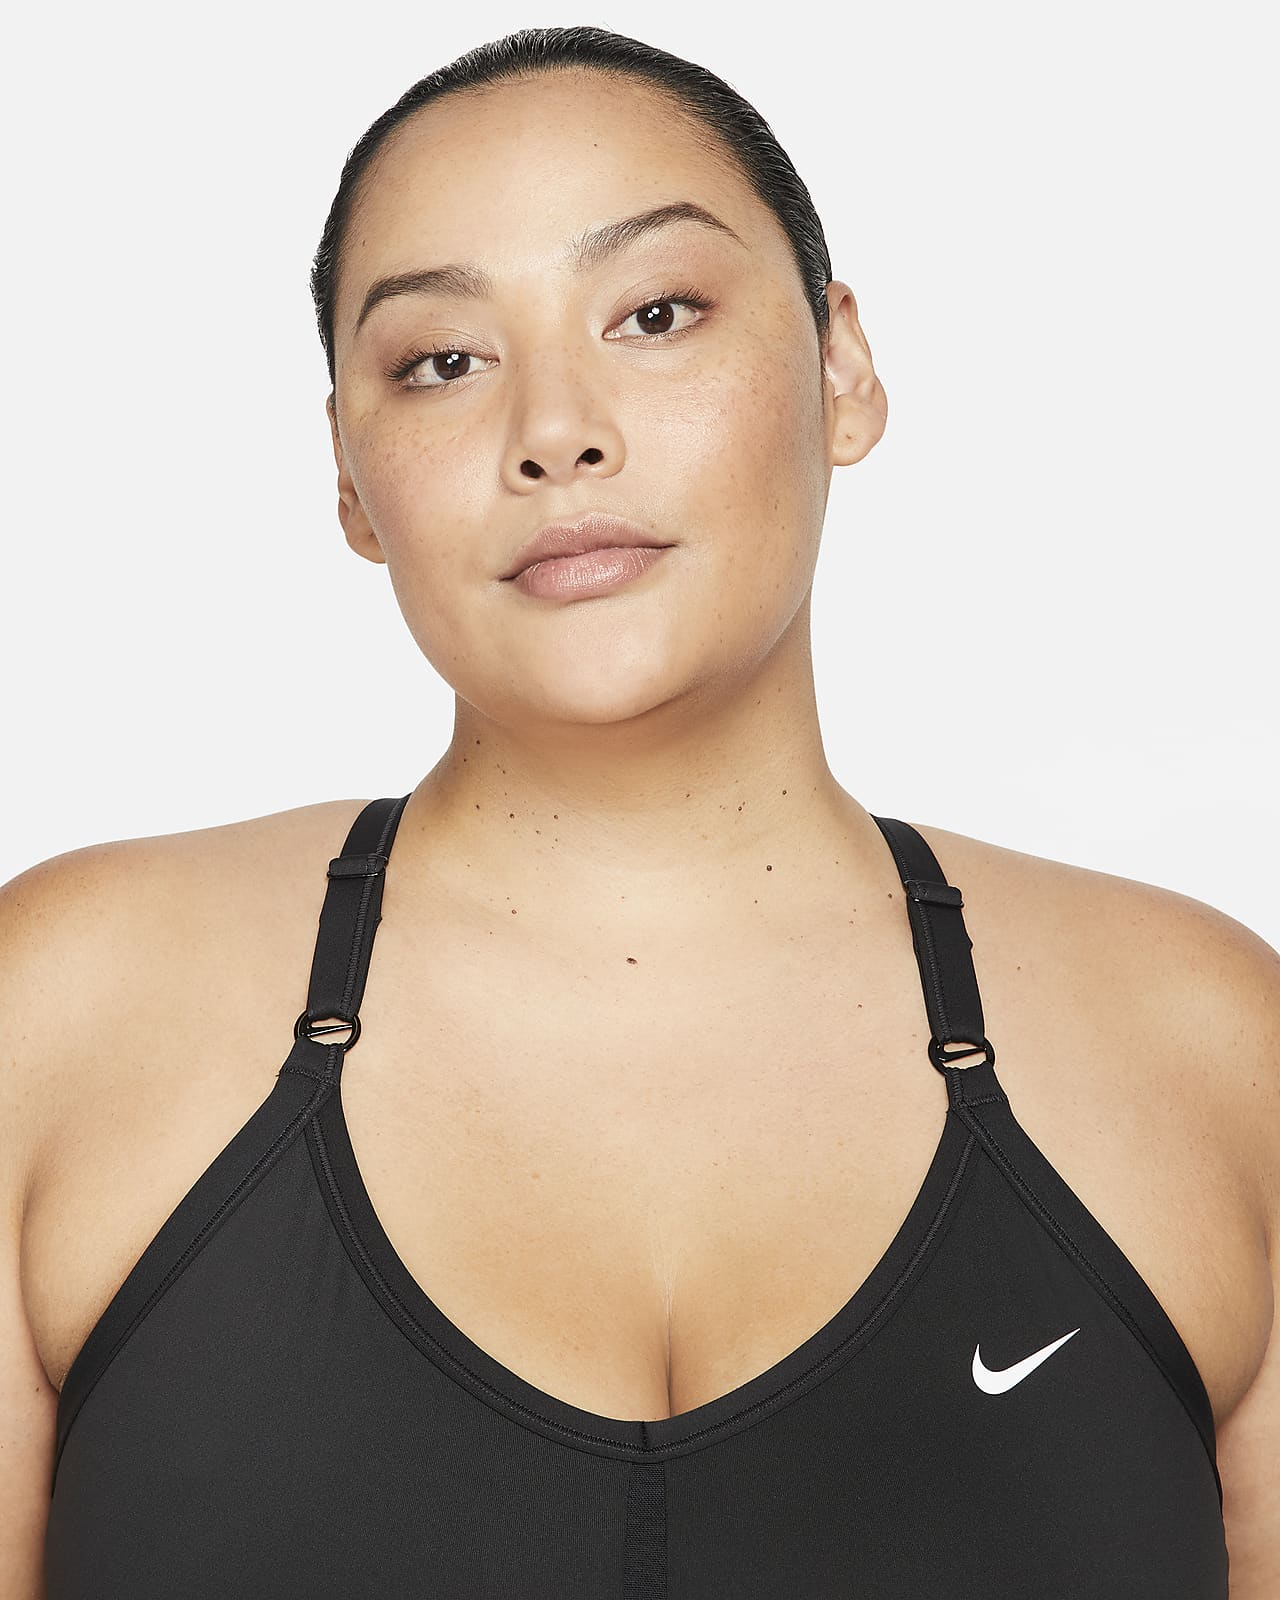 NEW!! Nike Women's Charcoal Indy Soft Light Support Sports Bras Size XL  #349